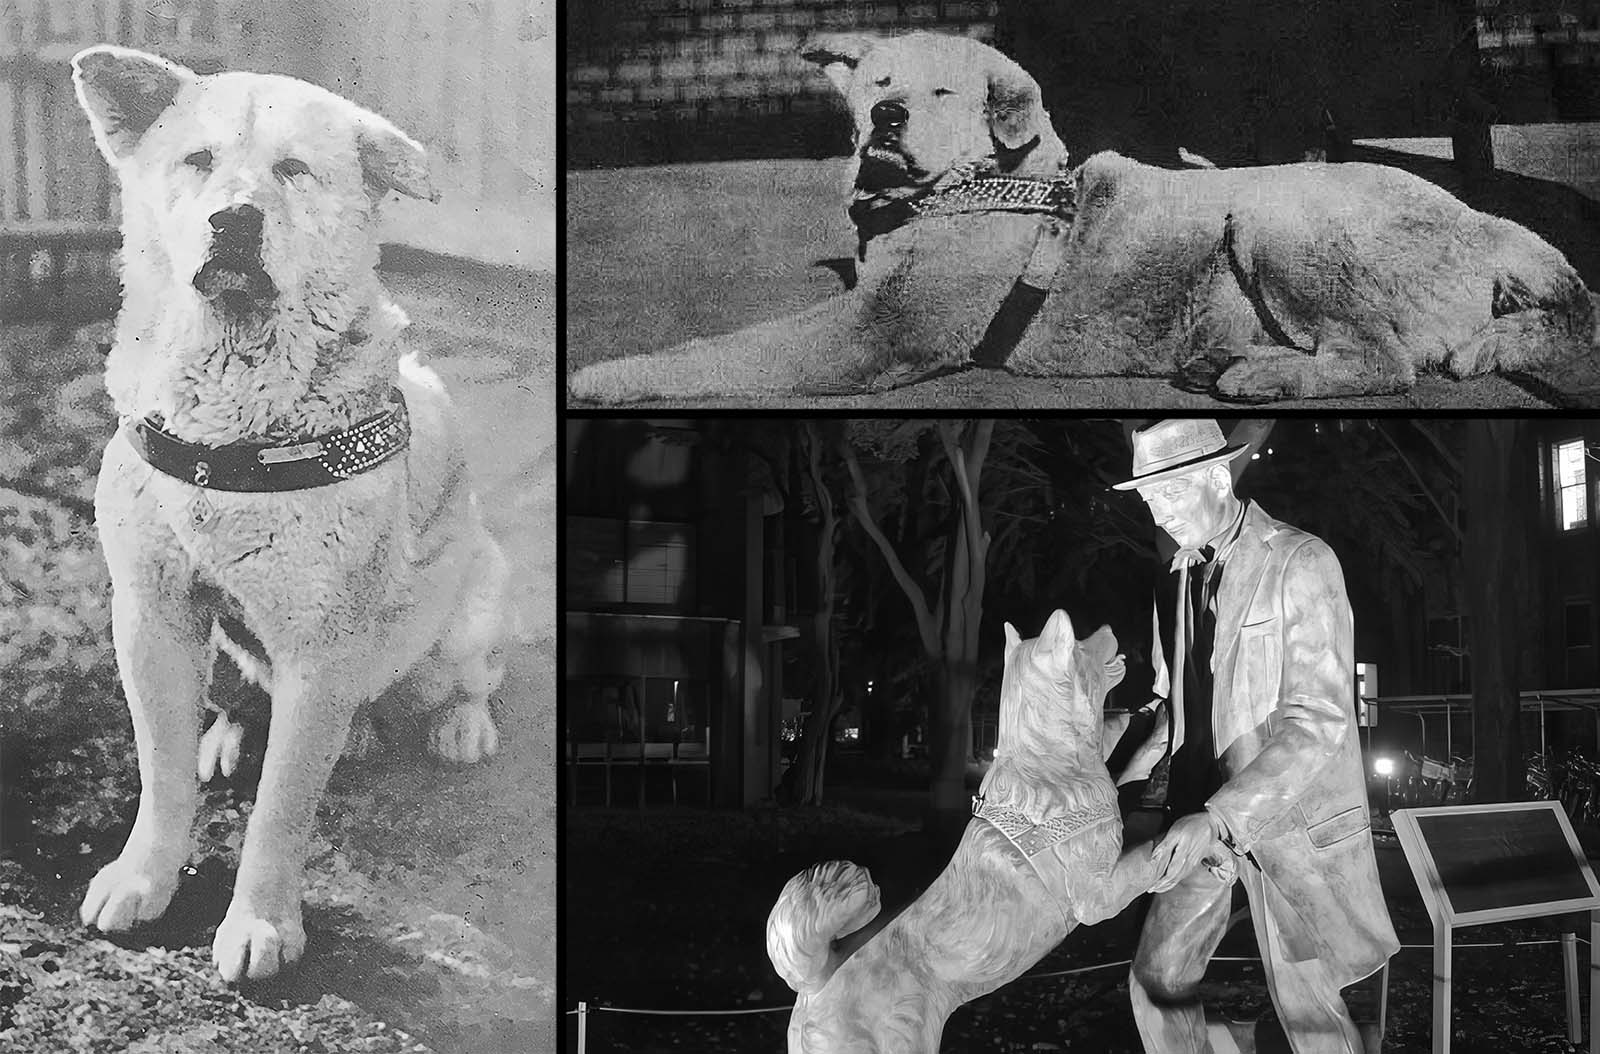 Hachiko: The Touching Story of a Loyal Dog who Waited for Ten years for his Deceased Owner